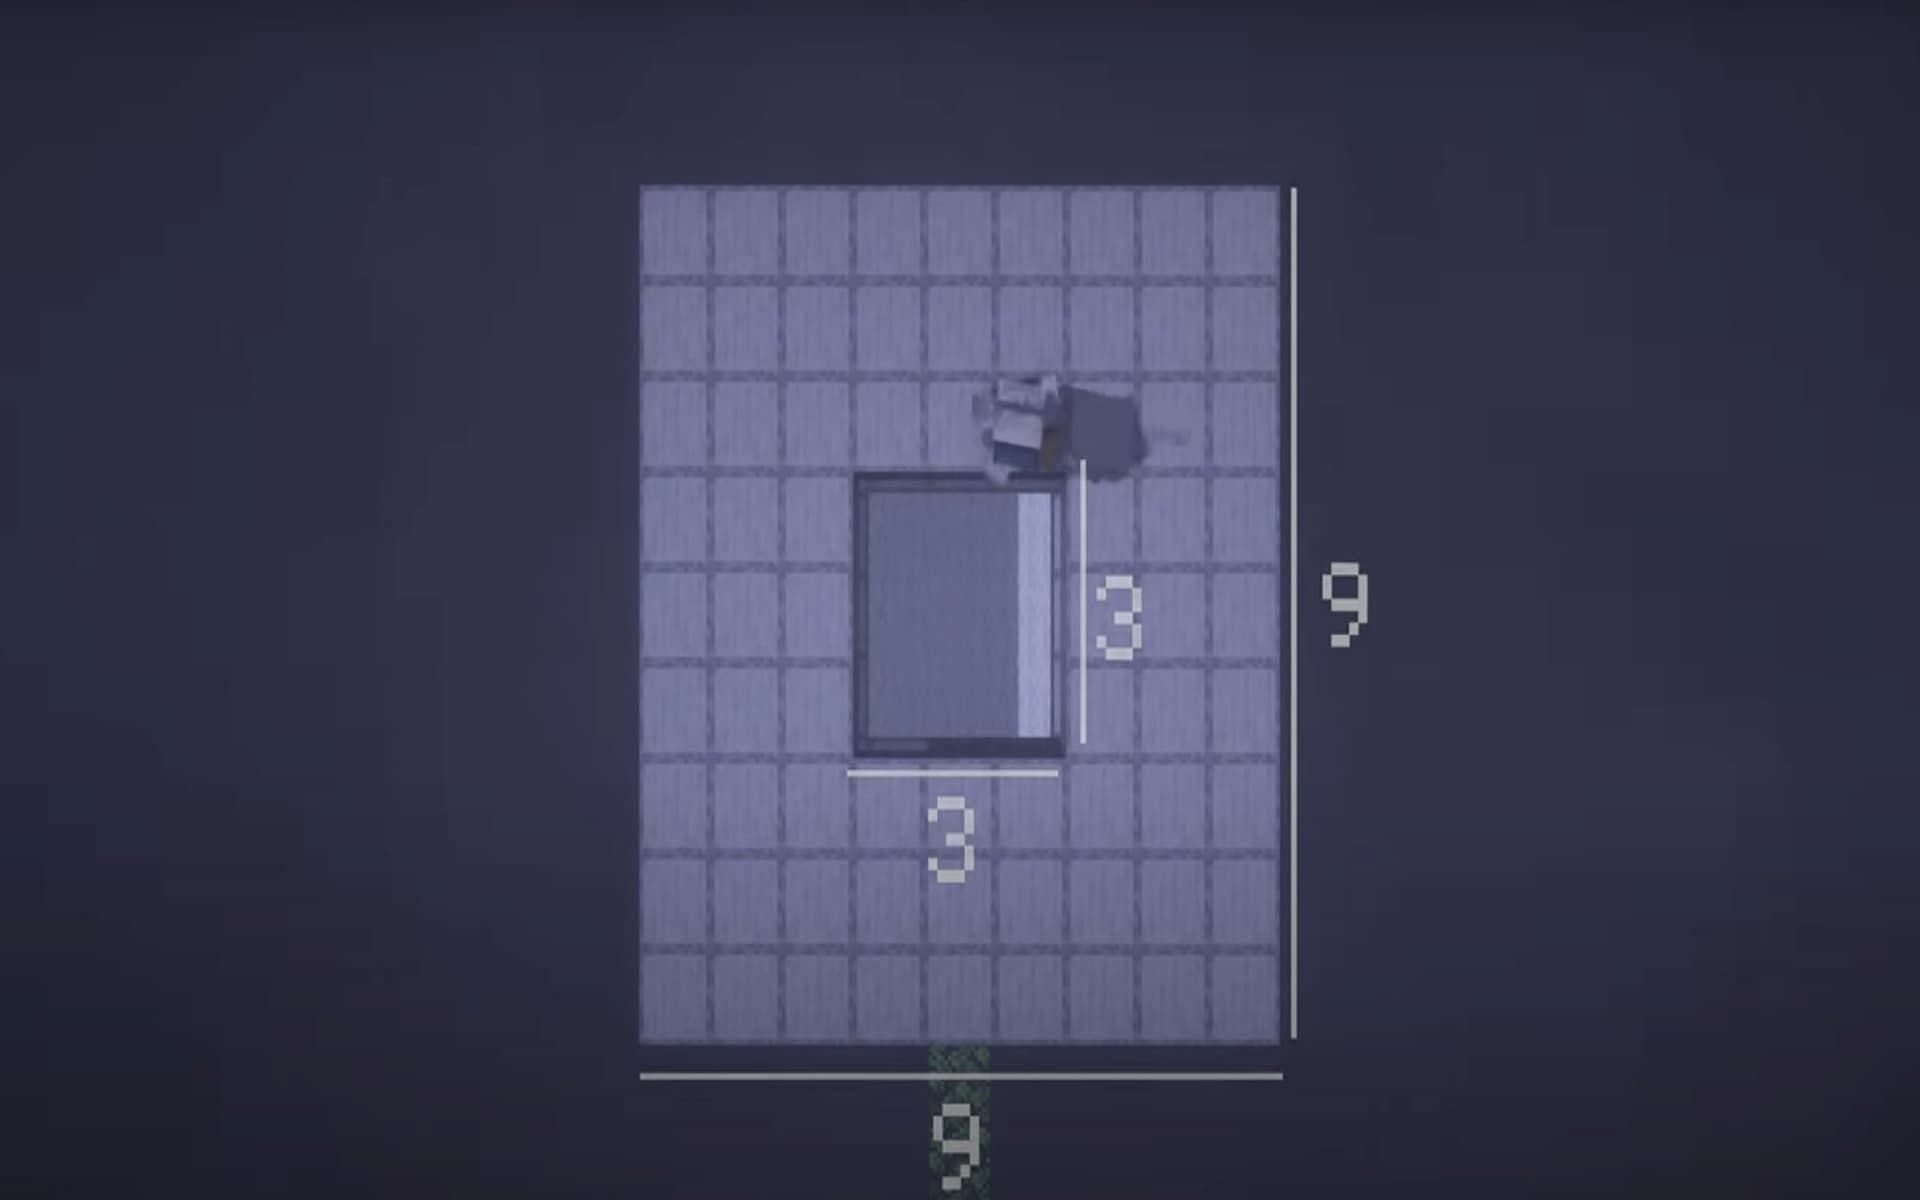 Build another 9x9 platform with a 3x3 hole in the middle (Image via YouTube/Moretingz)